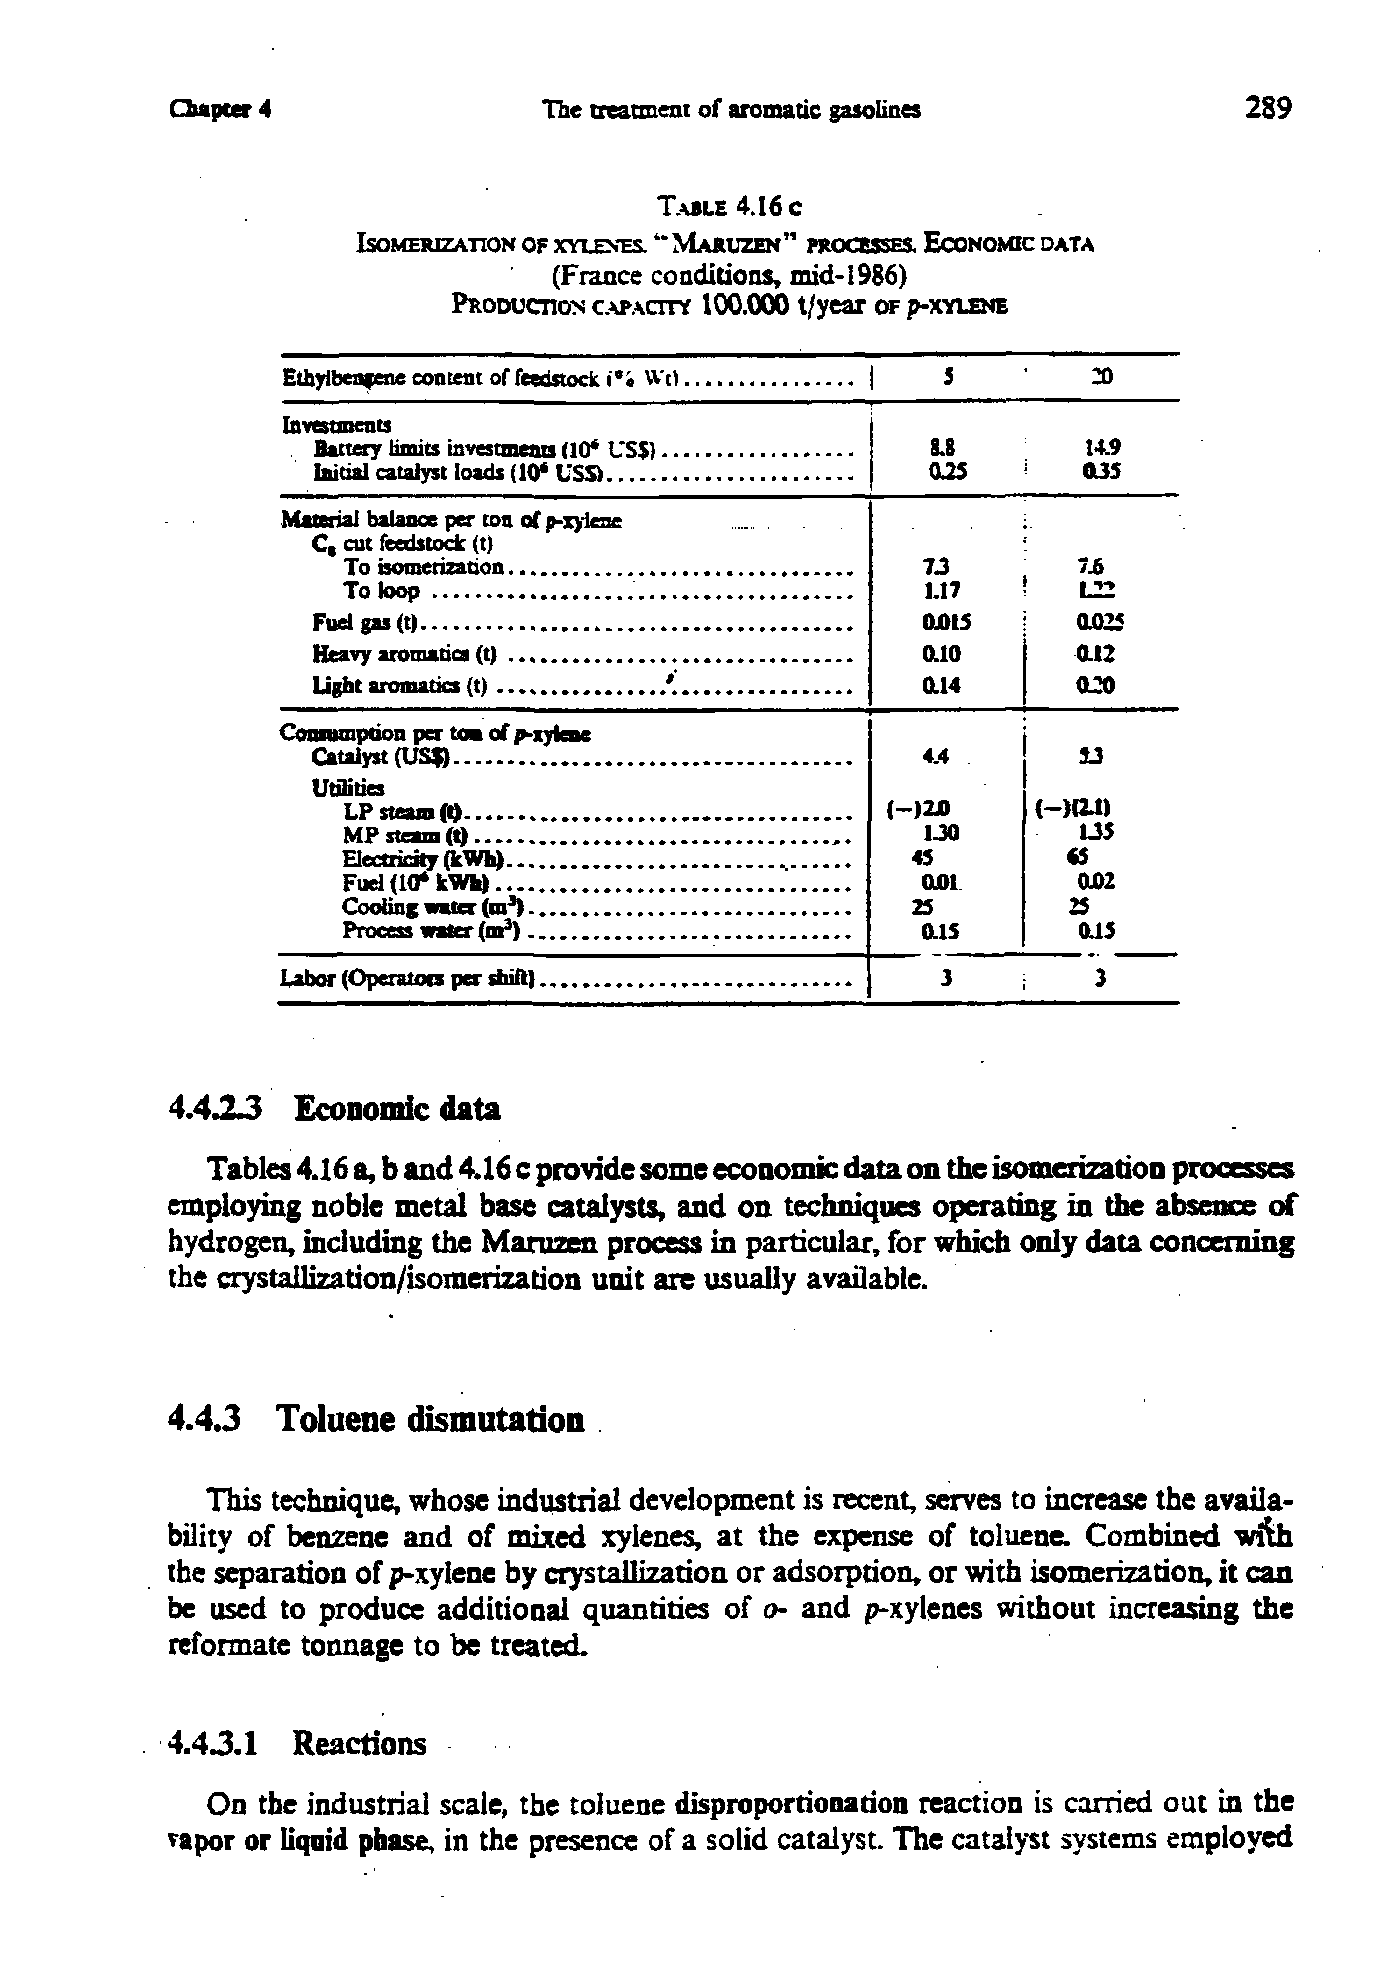 Tables 4.16 a, b and 4.16 c provide some economic data on the isomerizatioD processes employing noble metal base catalysts, and on techniques operating in the absence of hydrogen, including the Manizen process in particular, for which only data concerning the crystailization/isomerizadon unit are usually available.